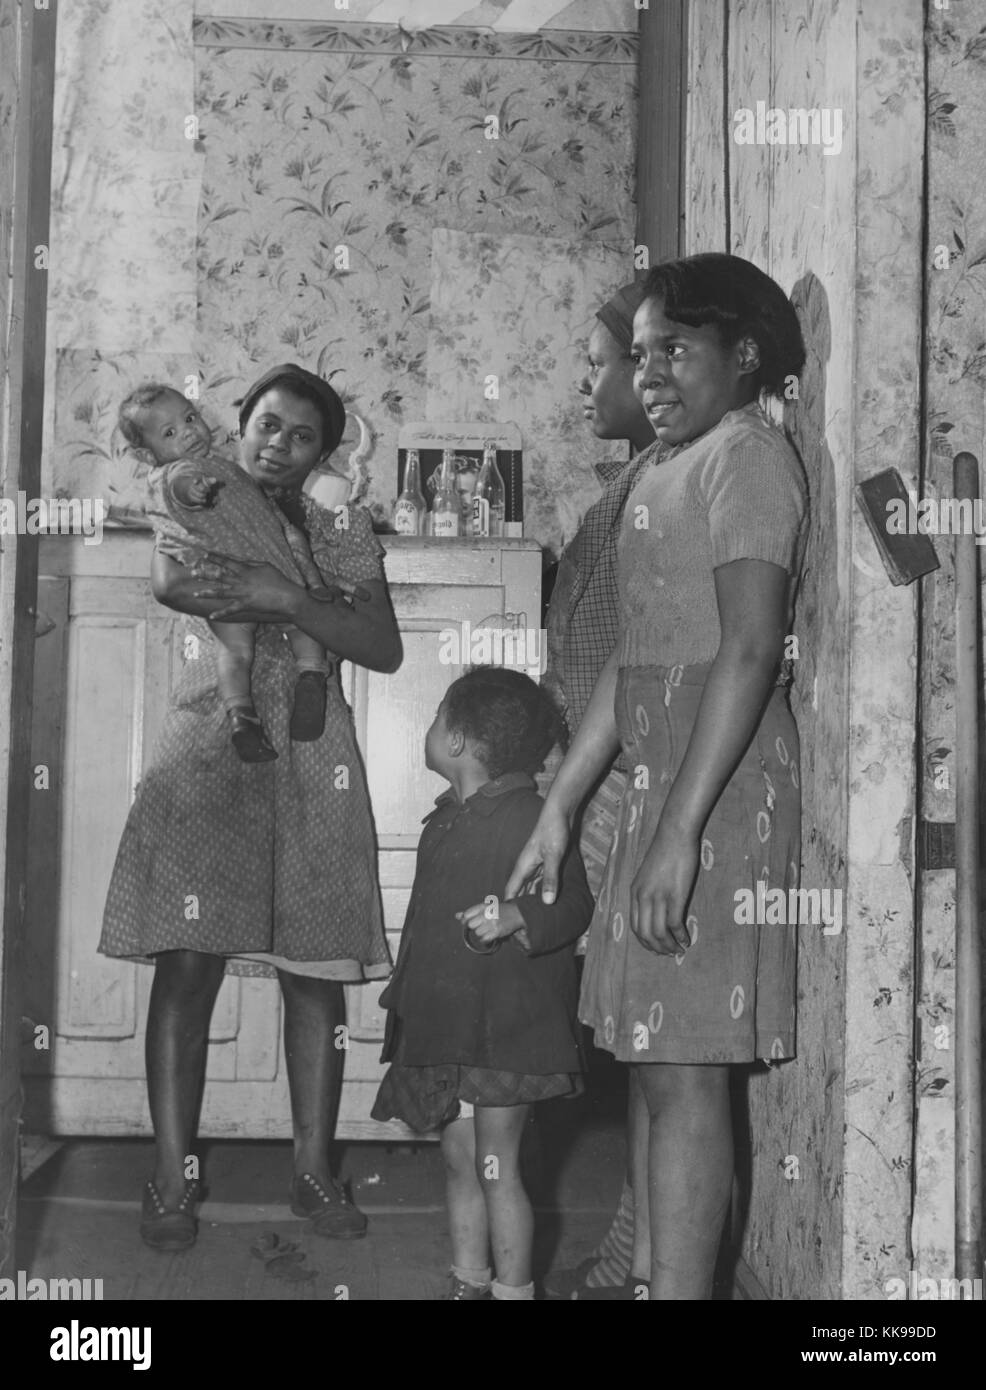 Five Young Black Women Vintage Photo Posed Outdoors ca 1940